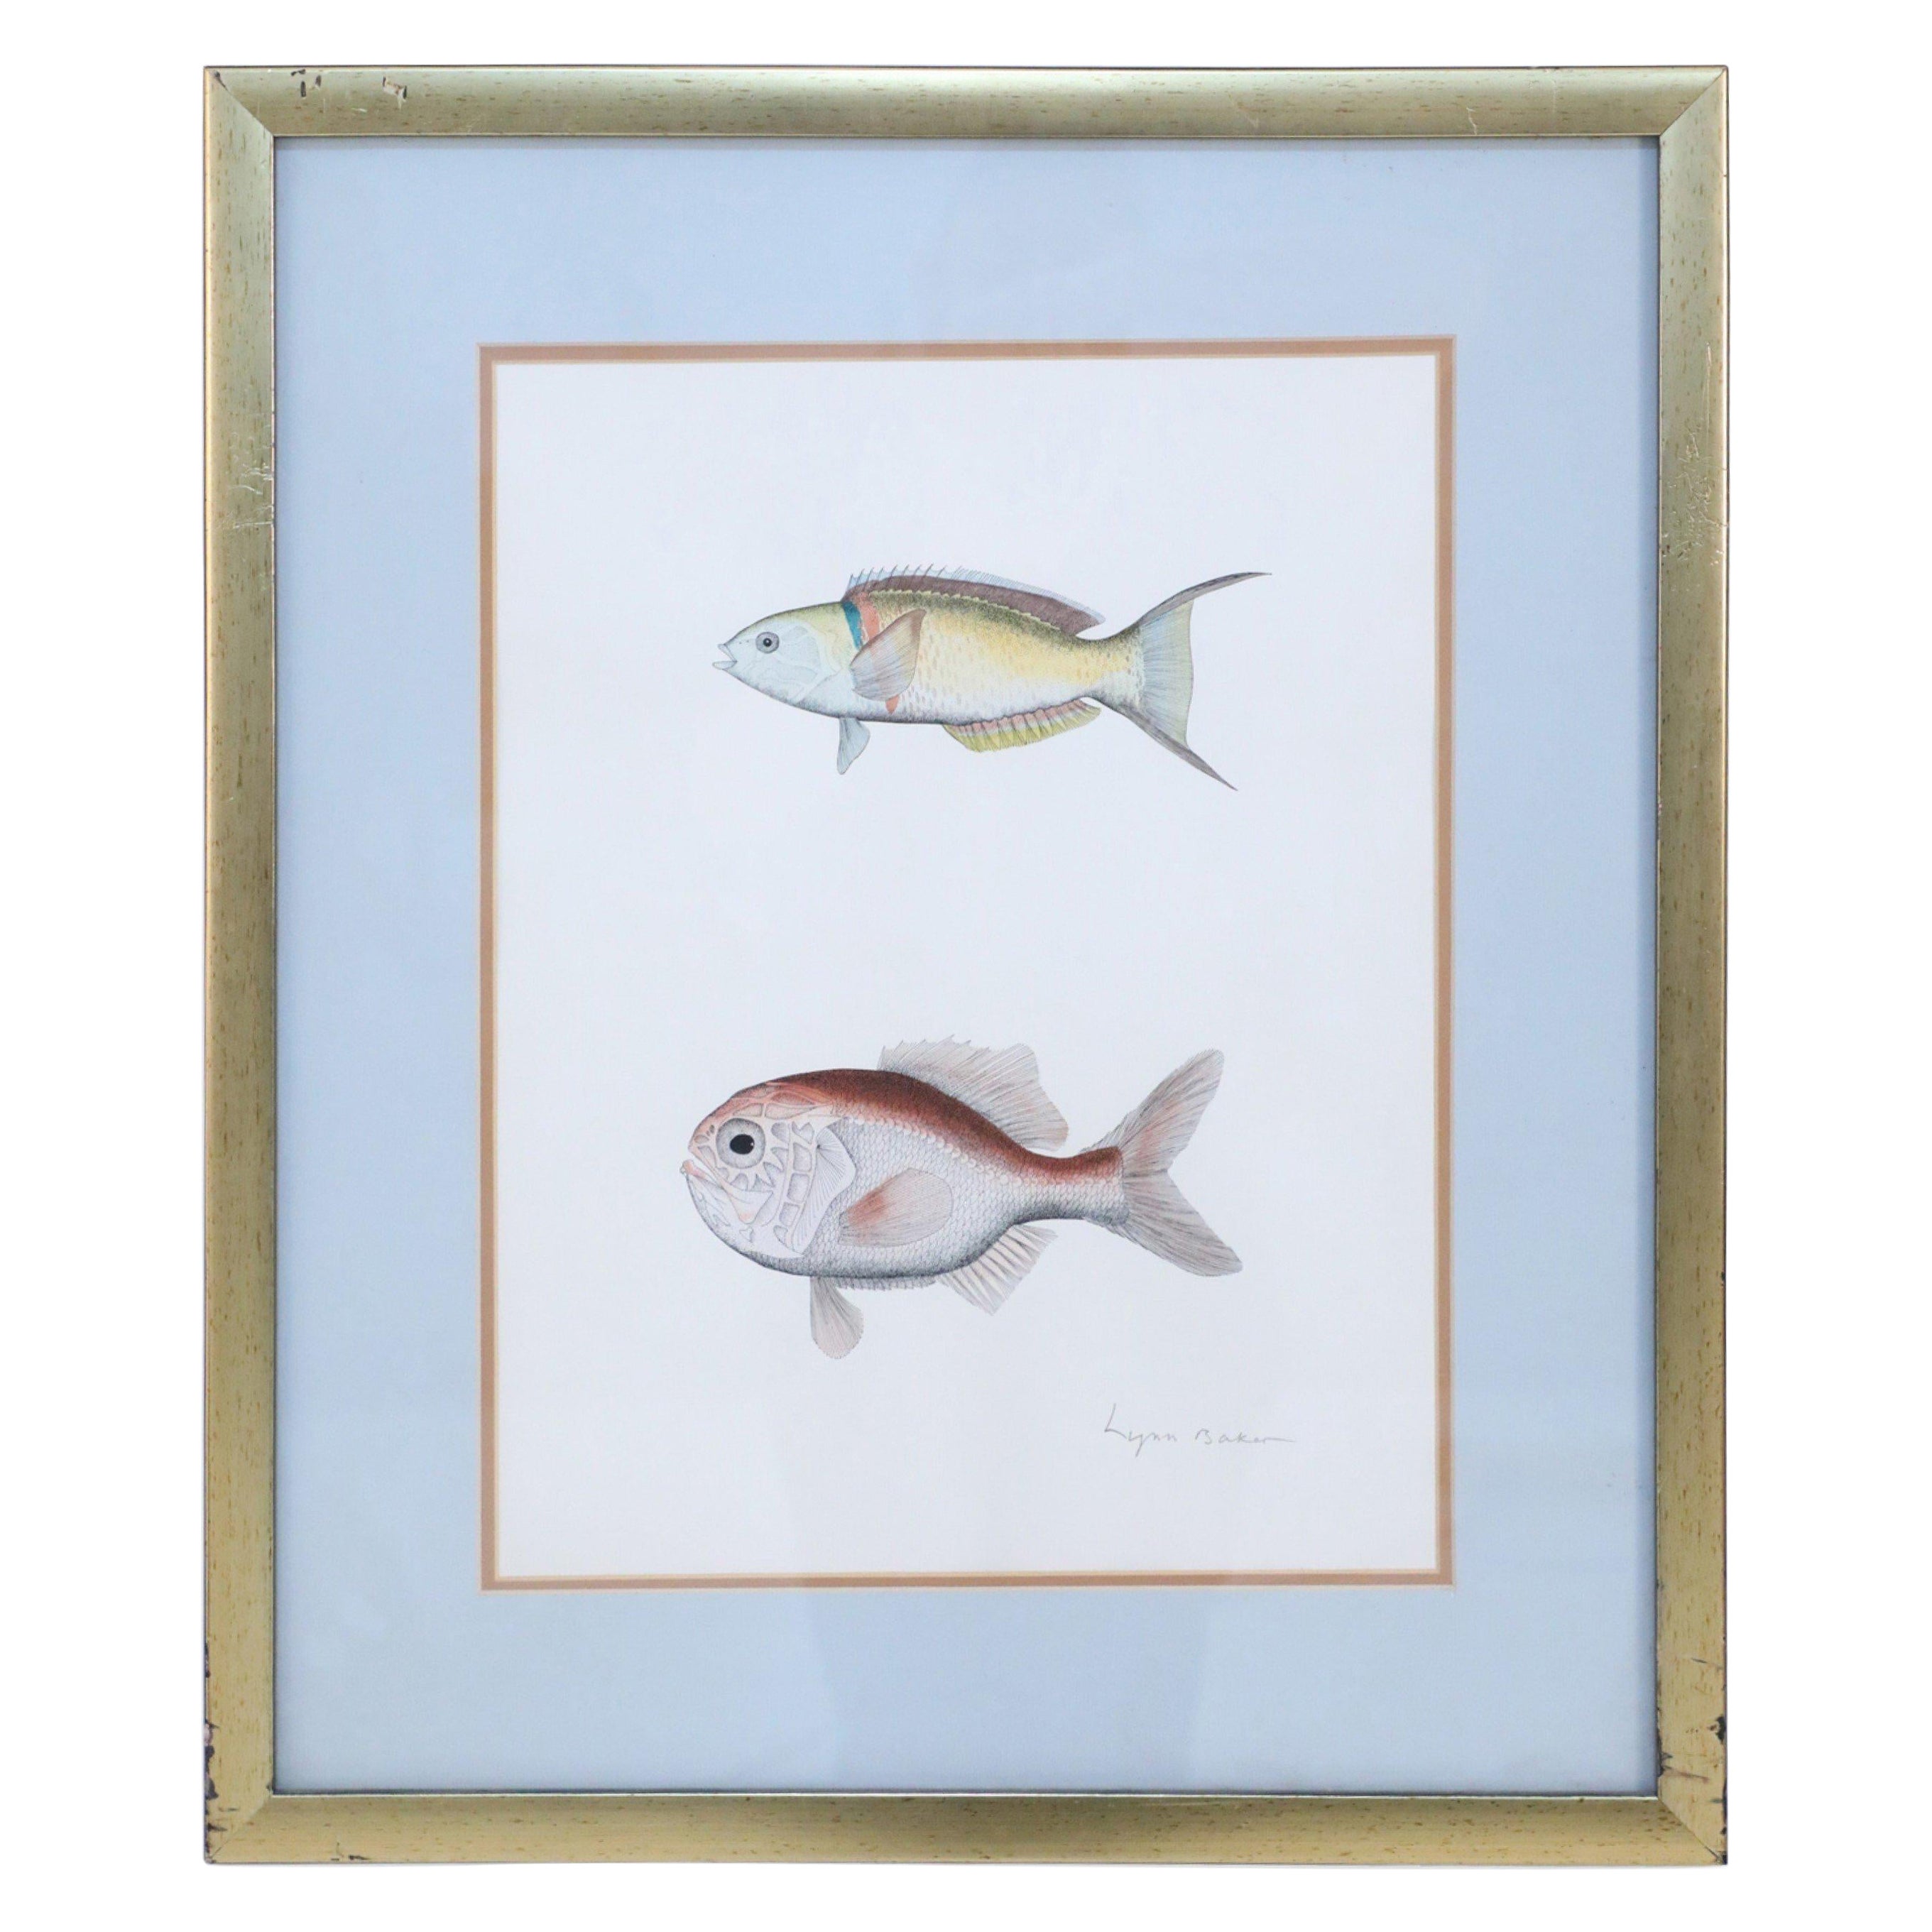 Framed Lithograph of Two Tropical Fish For Sale